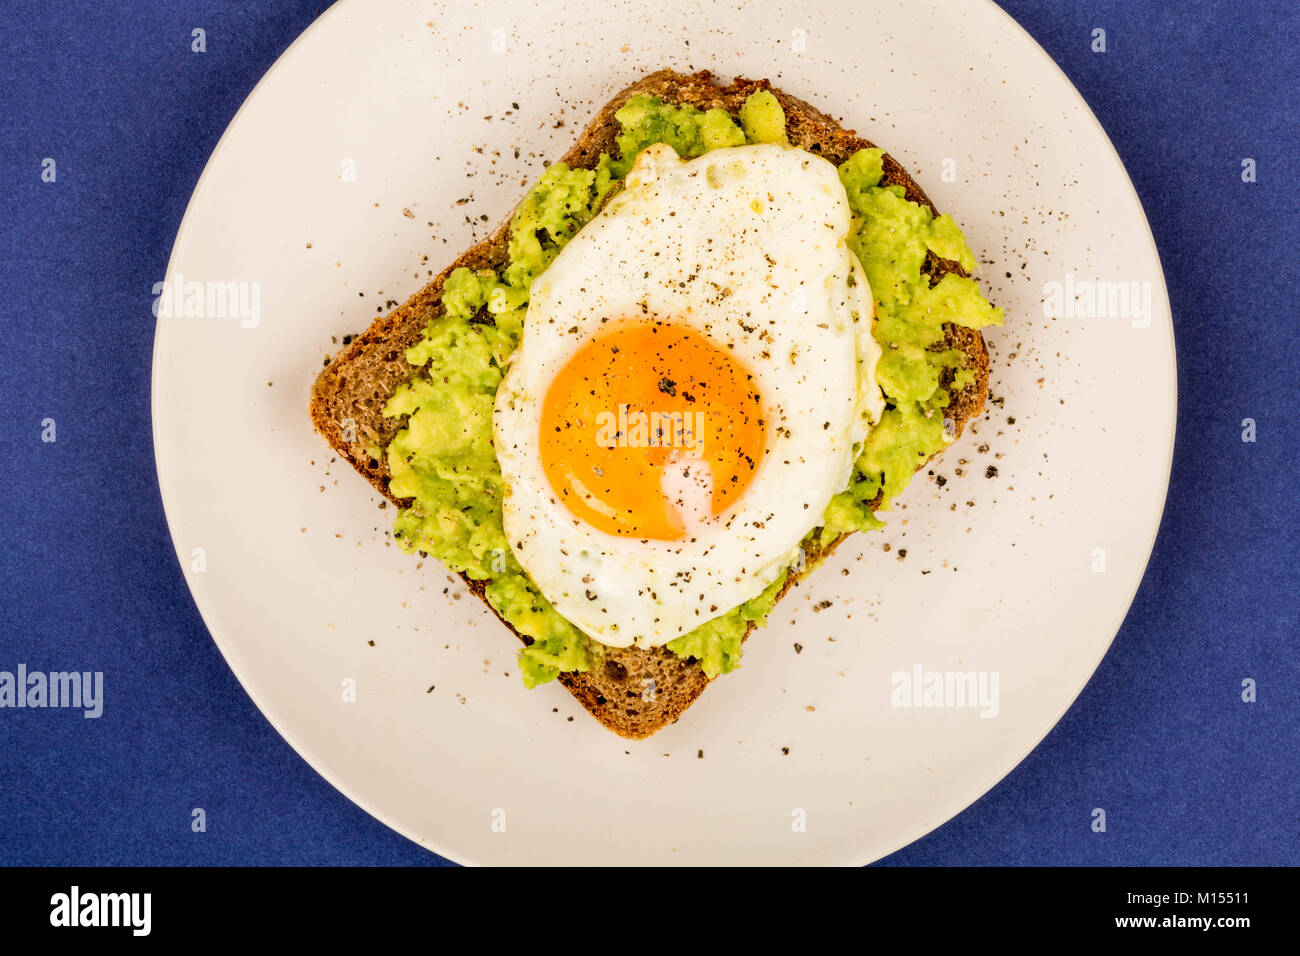 Fried Egg Sunny Side Up on Crushed Avocado And Rye Bread Open Faced Sandwich Against A Blue Background Stock Photo